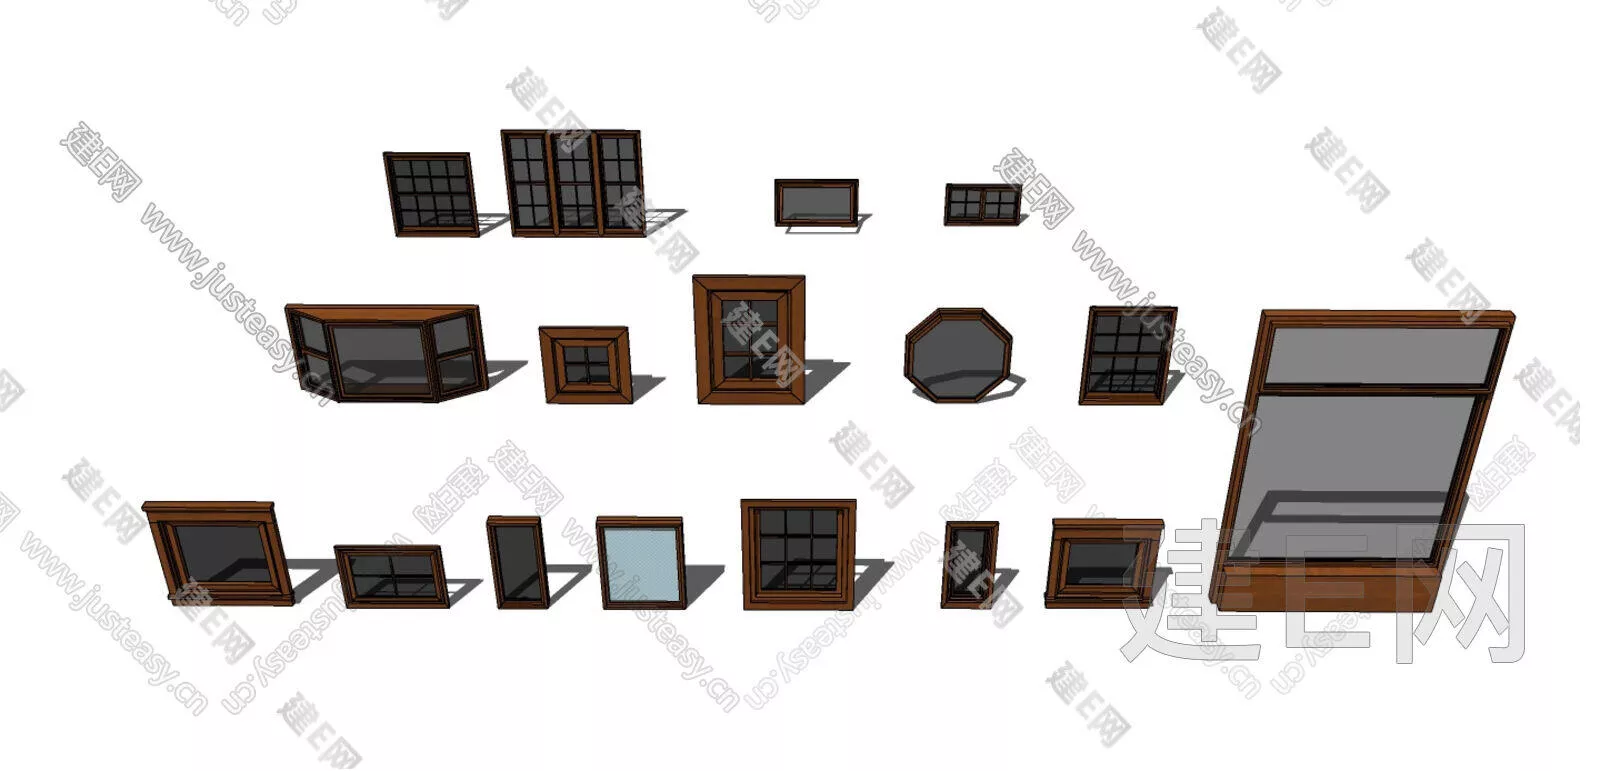 CHINESE DOOR AND WINDOWS - SKETCHUP 3D MODEL - ENSCAPE - 111231435